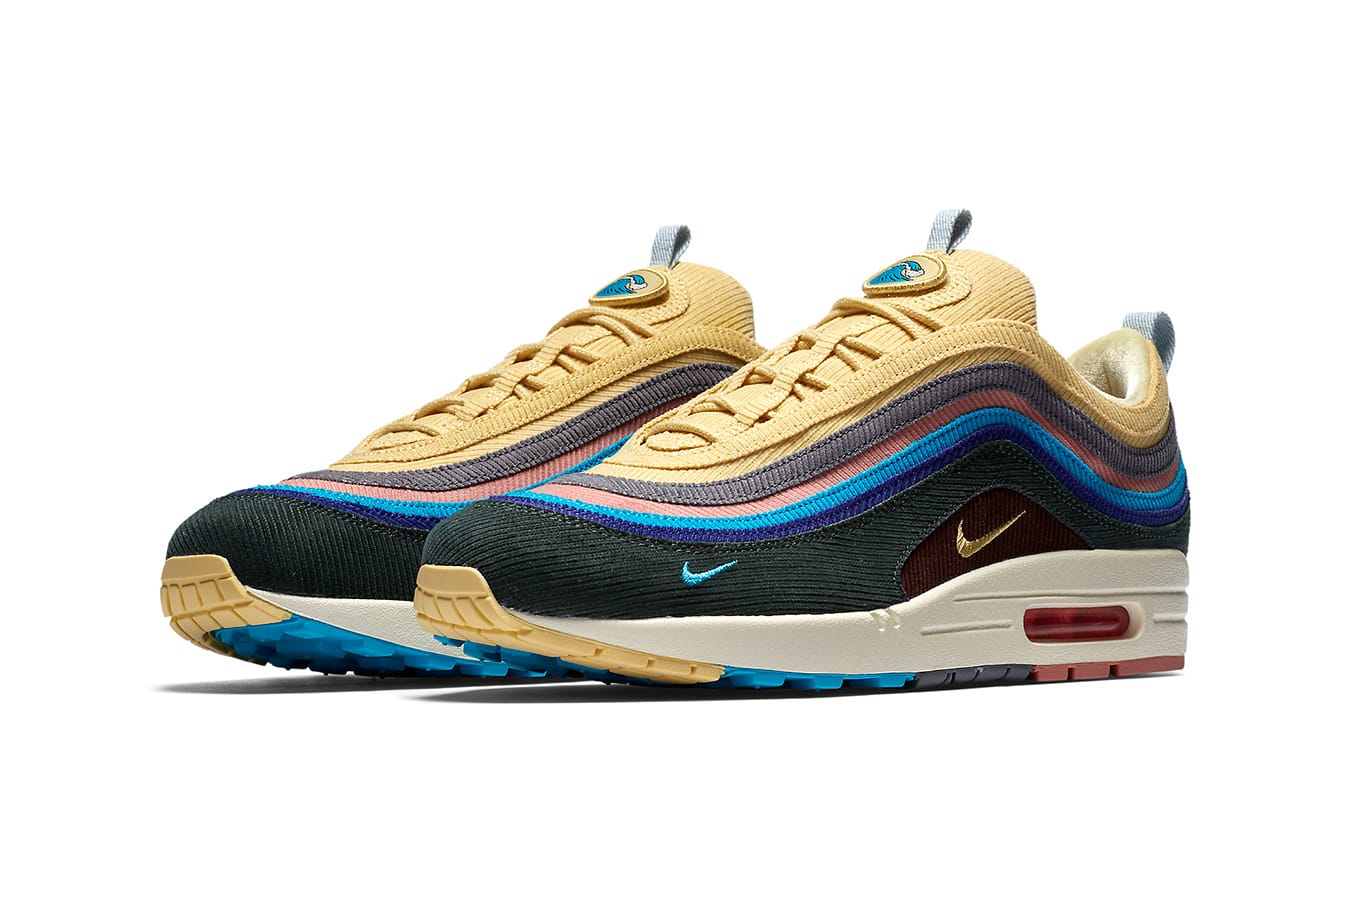 Sean Wotherspoon x Nike Air Max 1/97 Restock | Hypebeast